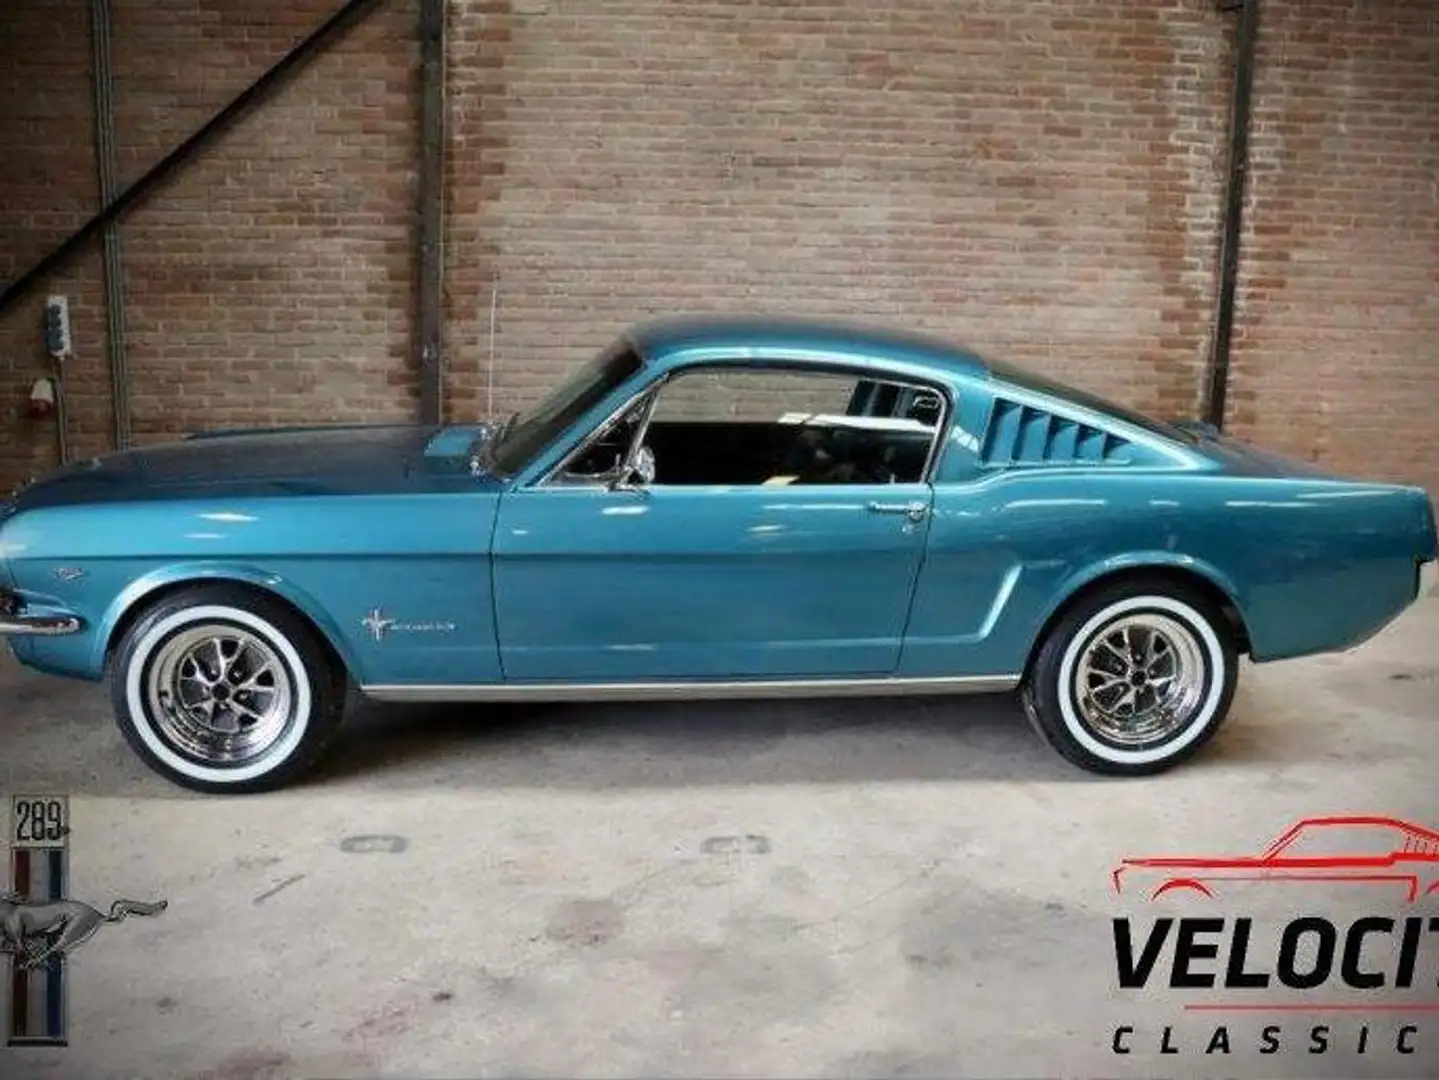 Ford Mustang Fastback C-code restored to new! price reduction! Azul - 1